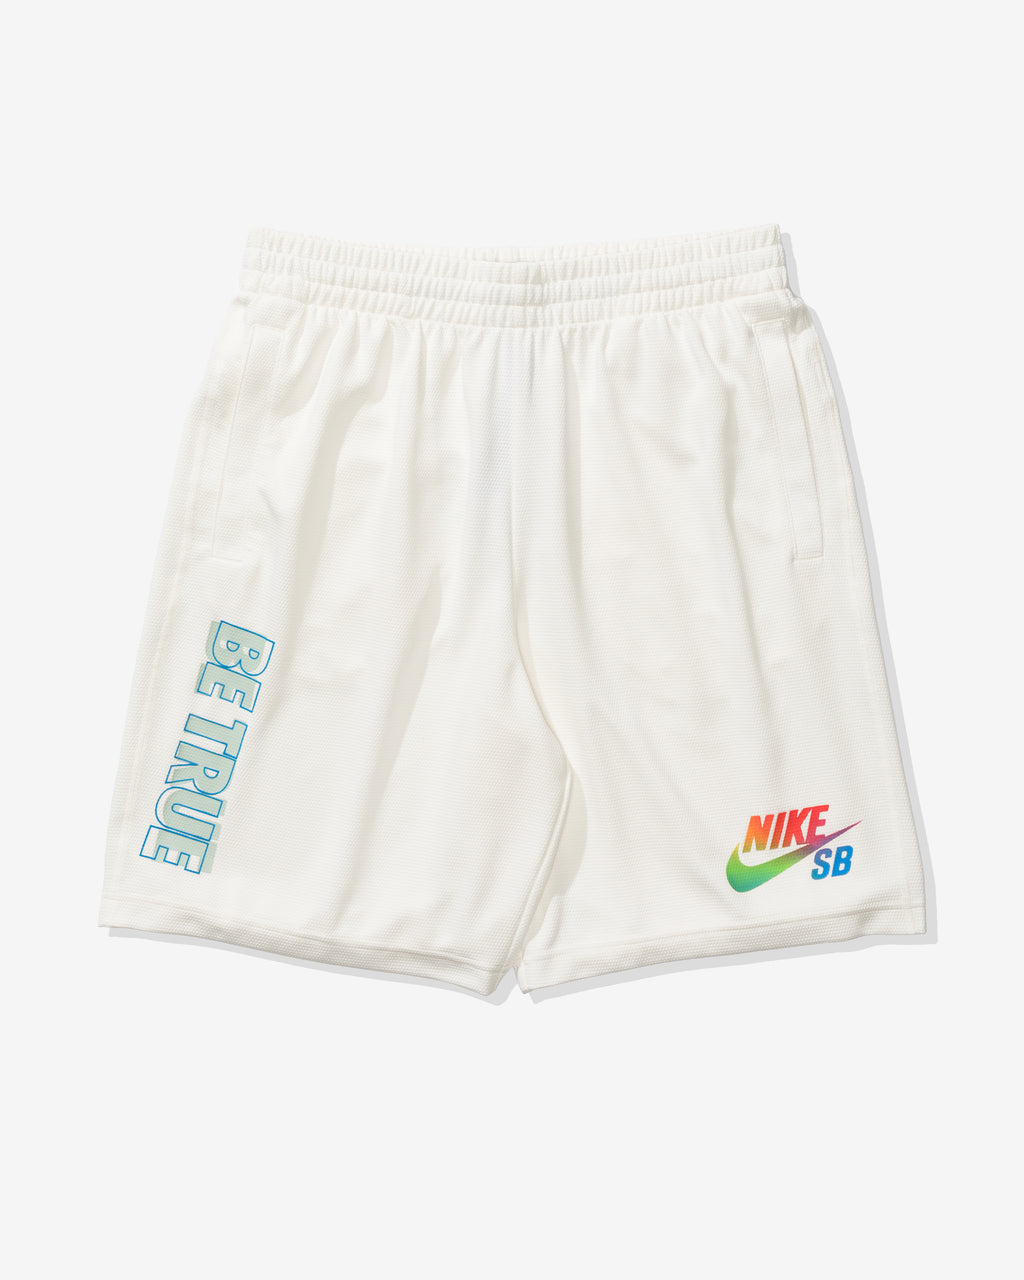 Undefeated Men Authentic Basketball Shorts teal green